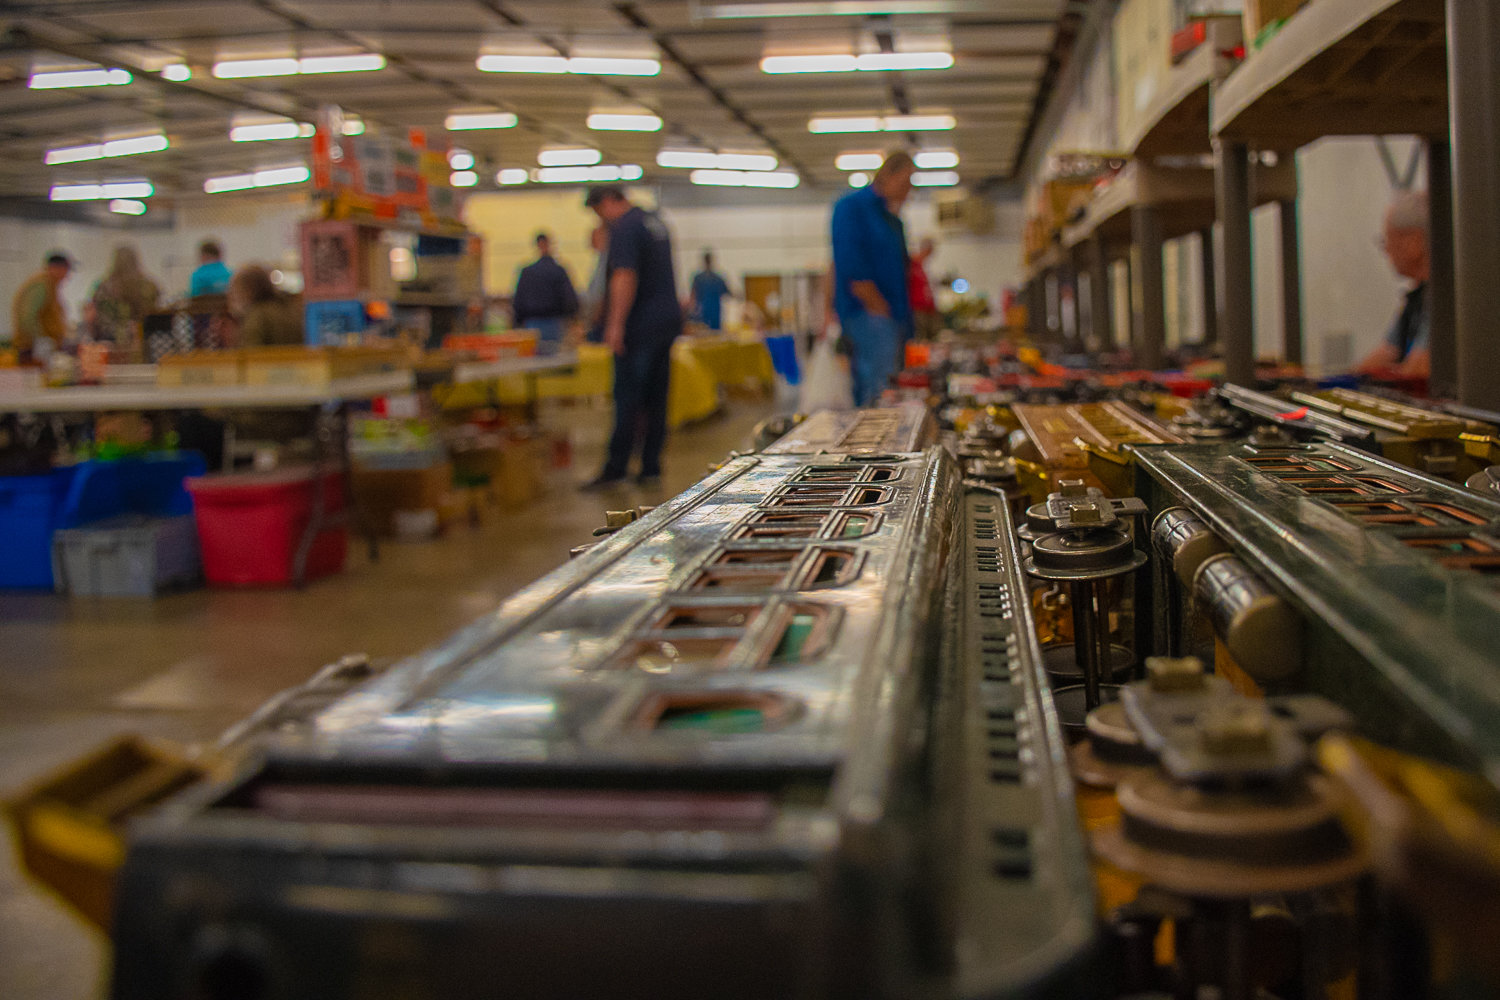 Model trains of all scales were on display for sale at the Southwest Washington Fairgrounds on Saturday.